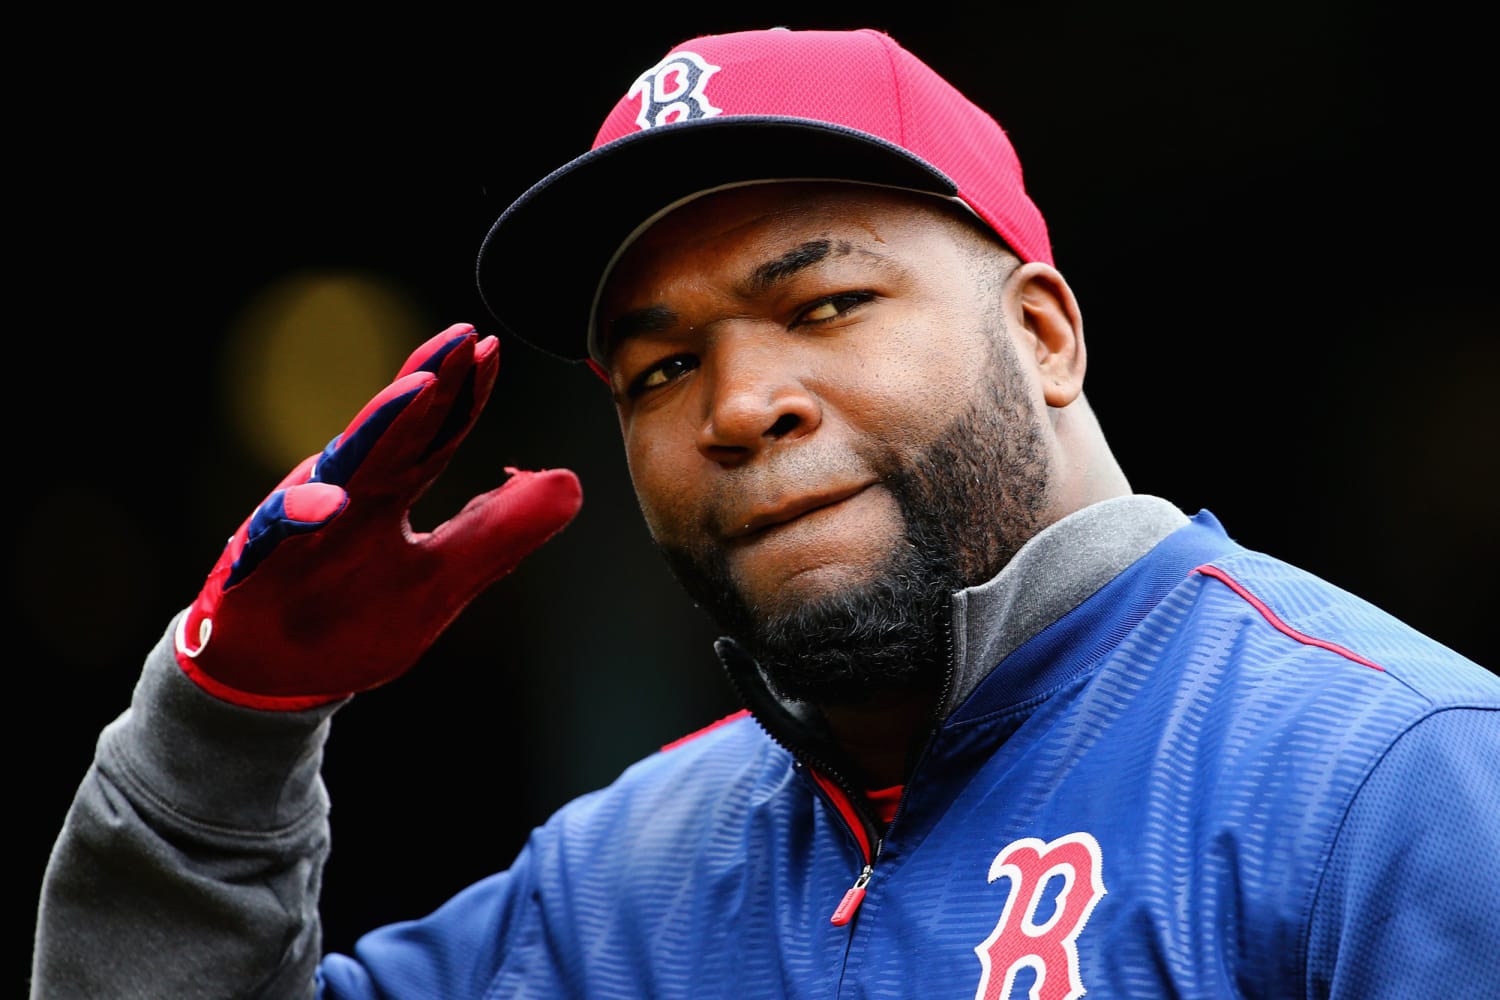 Former Red Sox star David Ortiz walking again after 2nd surgery,  spokesperson says